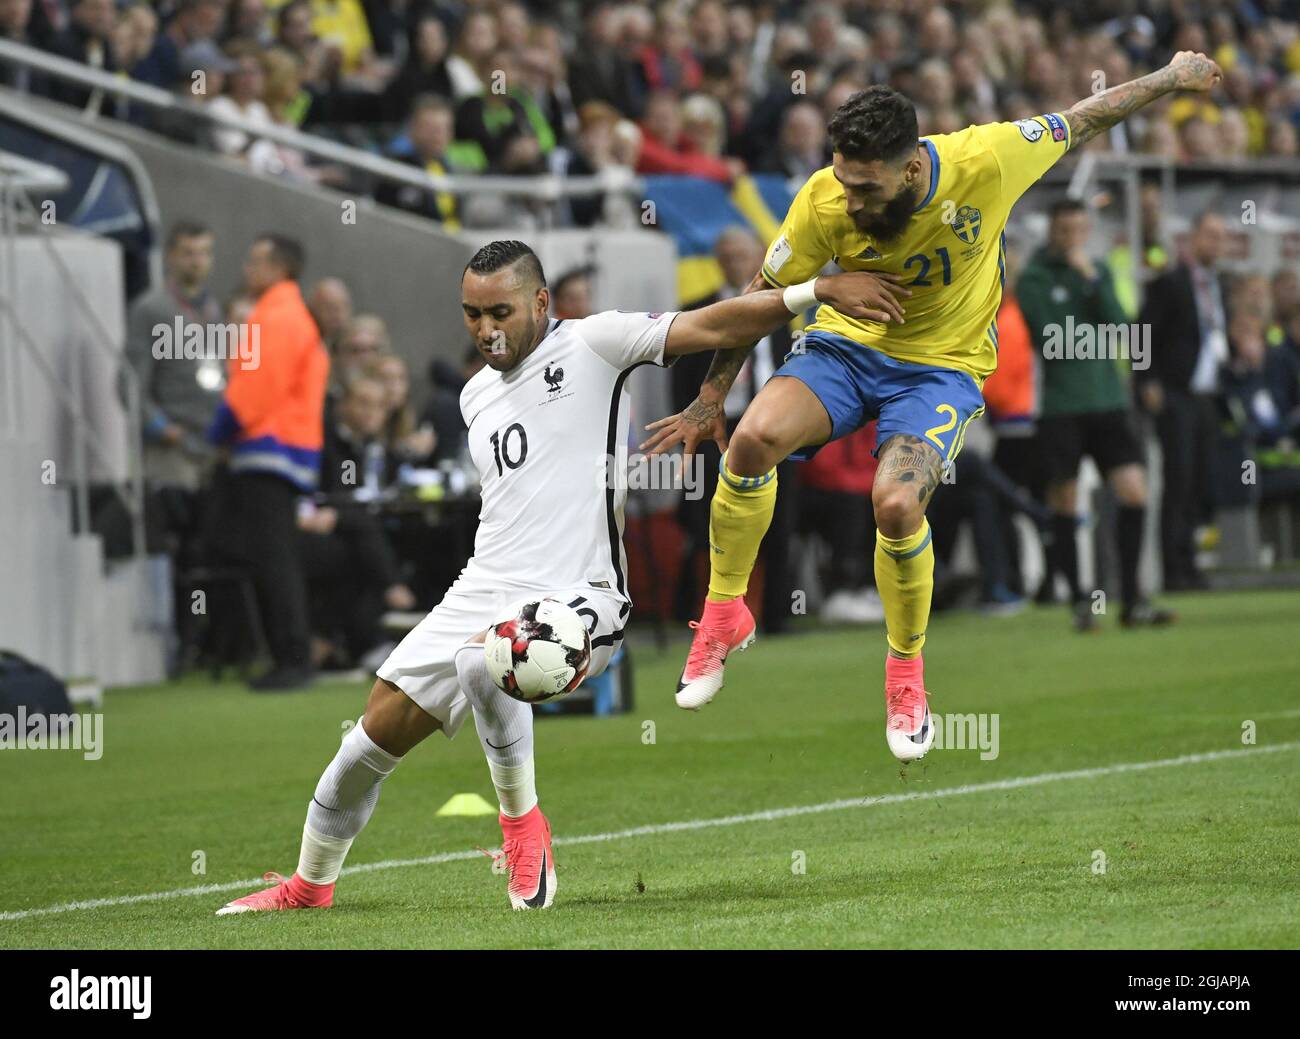 France's Dimitri Payet (L) vies with Sweden's Jimmy Durmaz during the FIFA World Cup 2018 group A qualifying soccer match between Sweden and France on June 9, 2017 at Friends Arena in Solna, Stockholm. Photo Janerik Henriksson / TT / kod 10010  Stock Photo